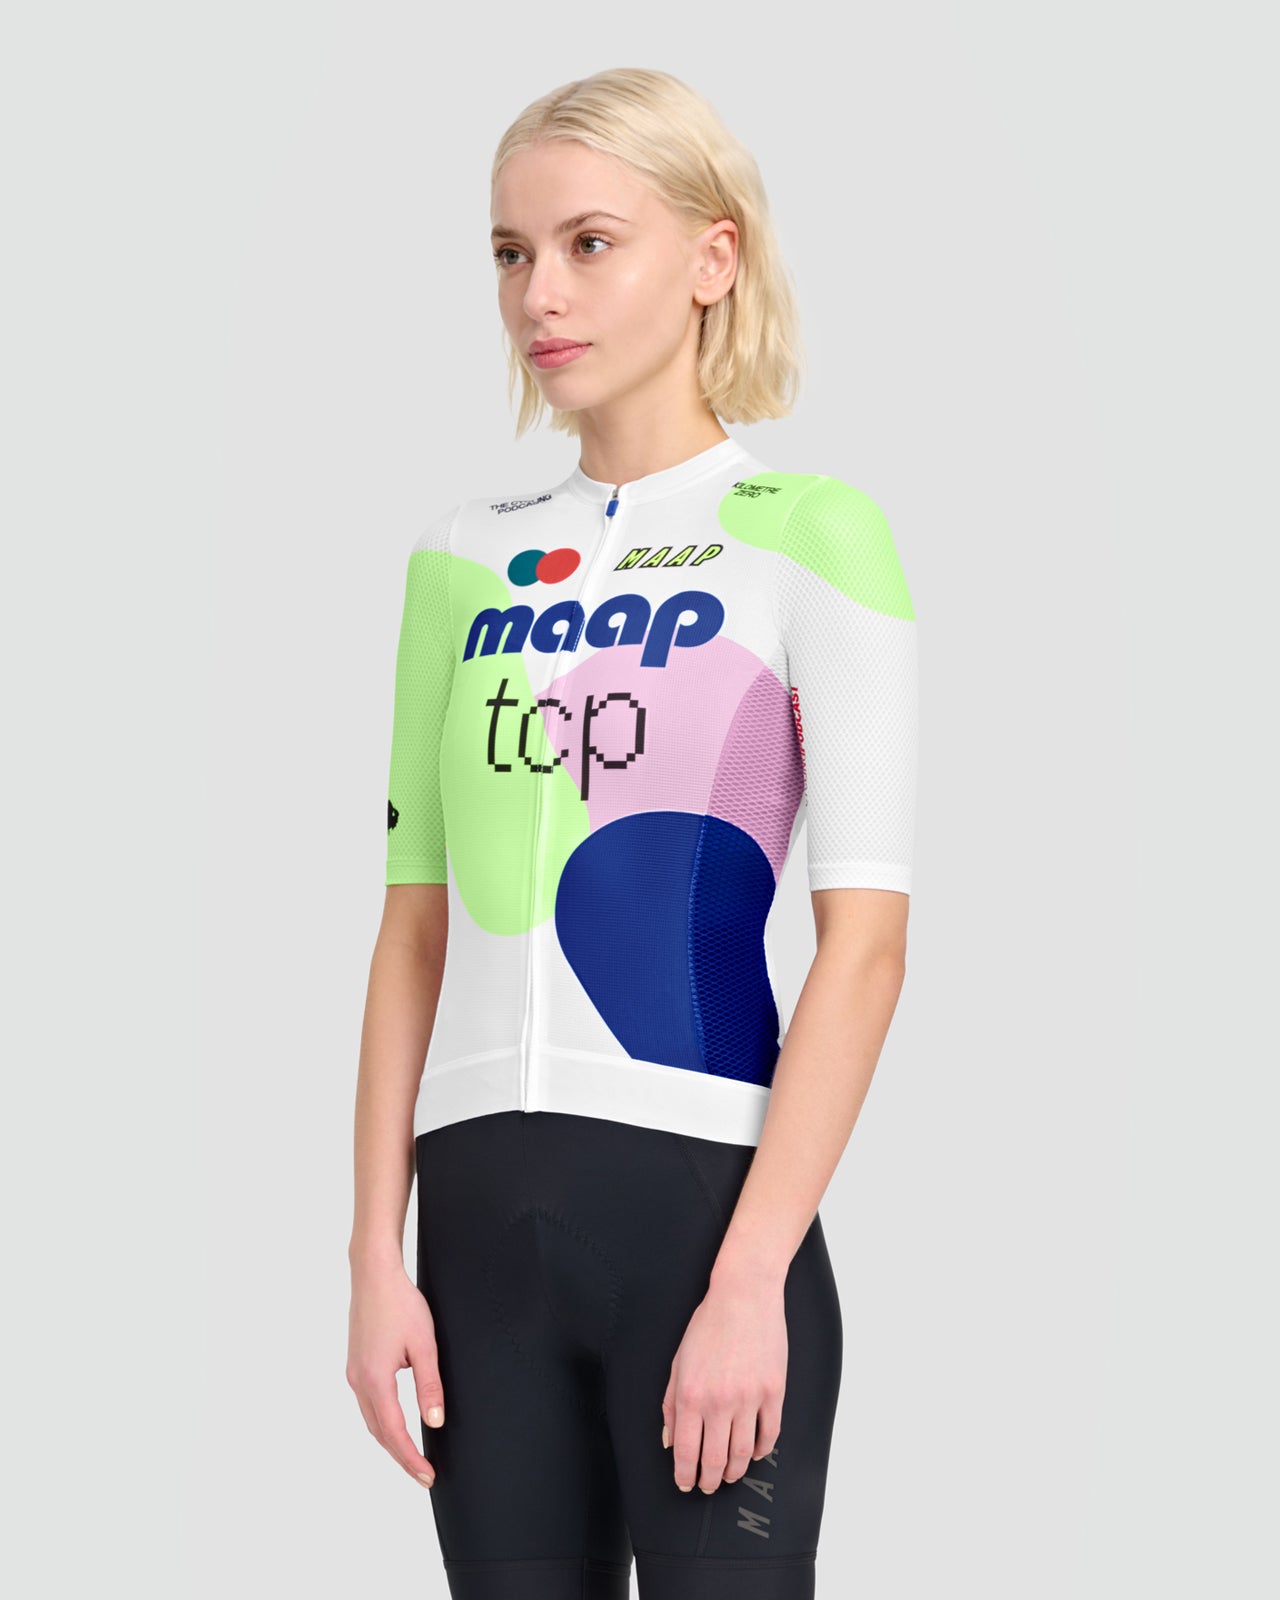 MAAP x The Cycling Podcast Women’s Jersey